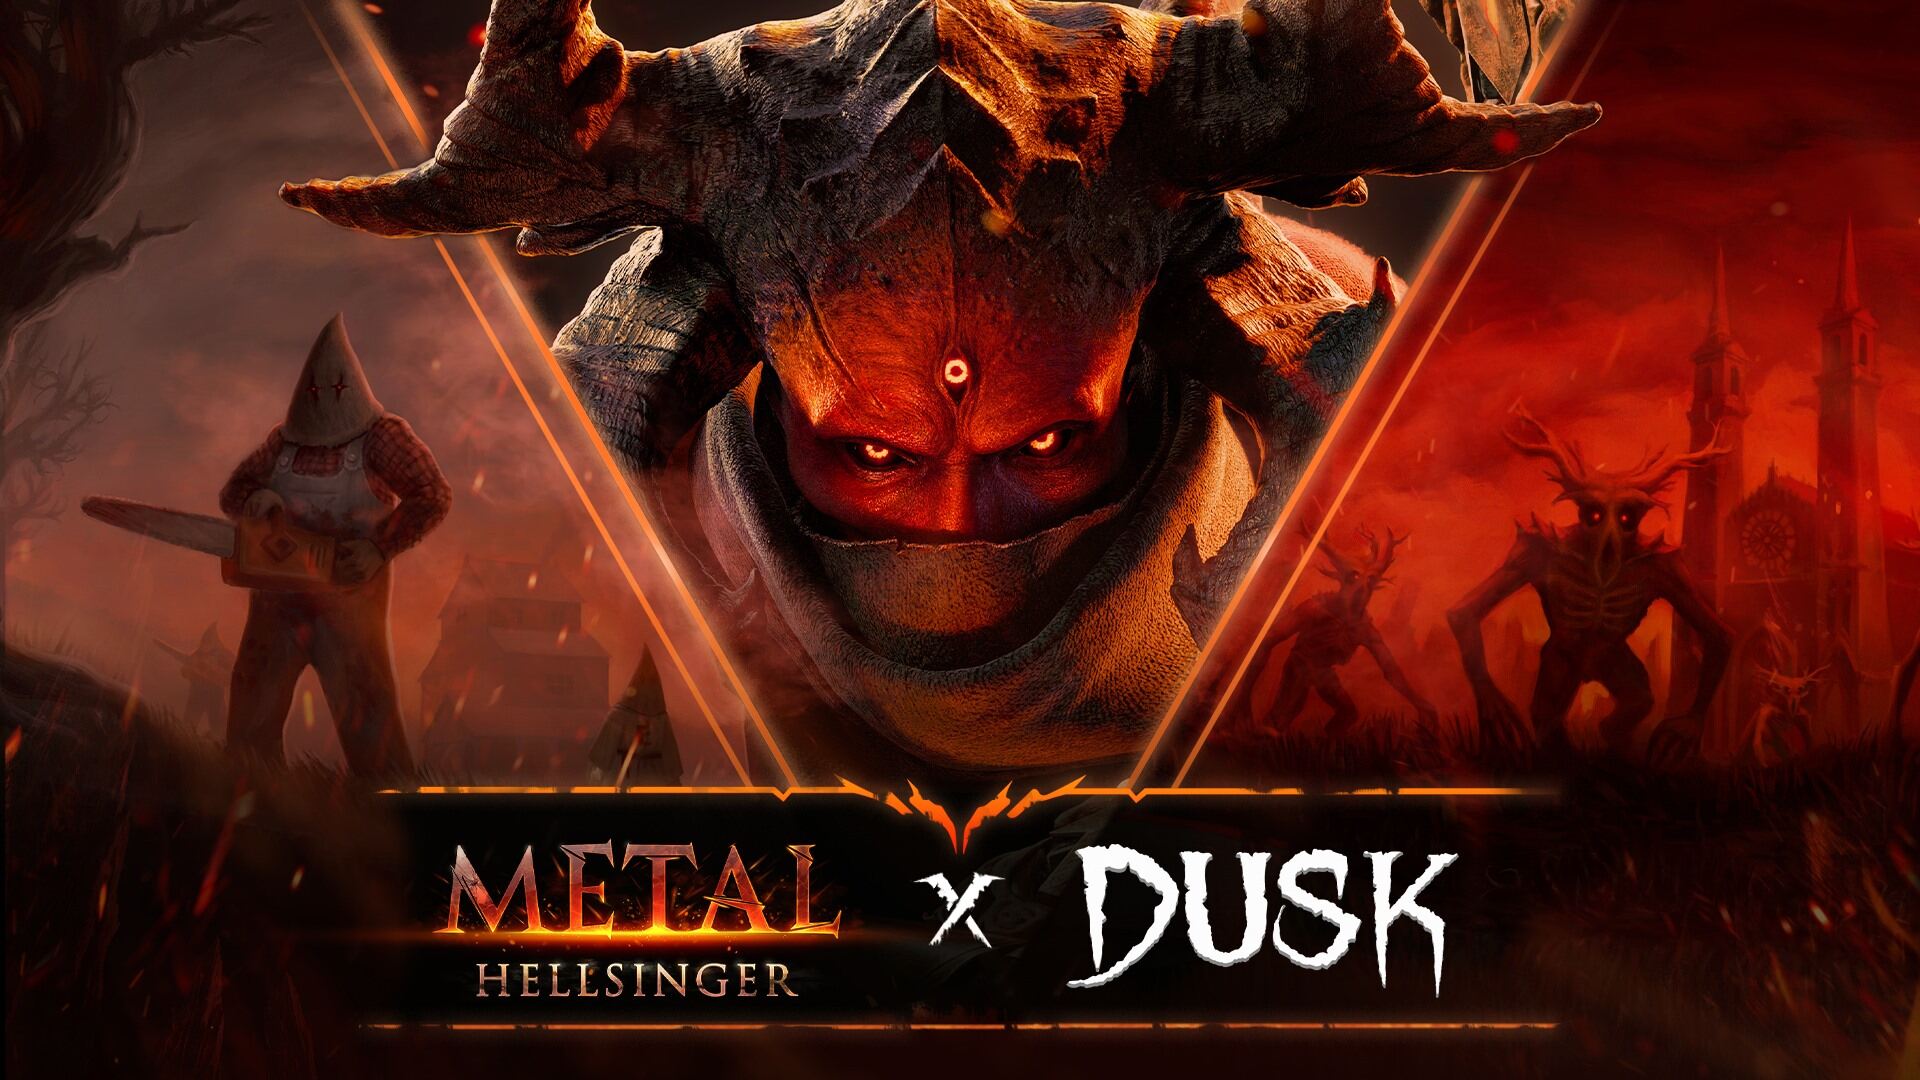 Slaying to the Beat With Metal: Hellsinger